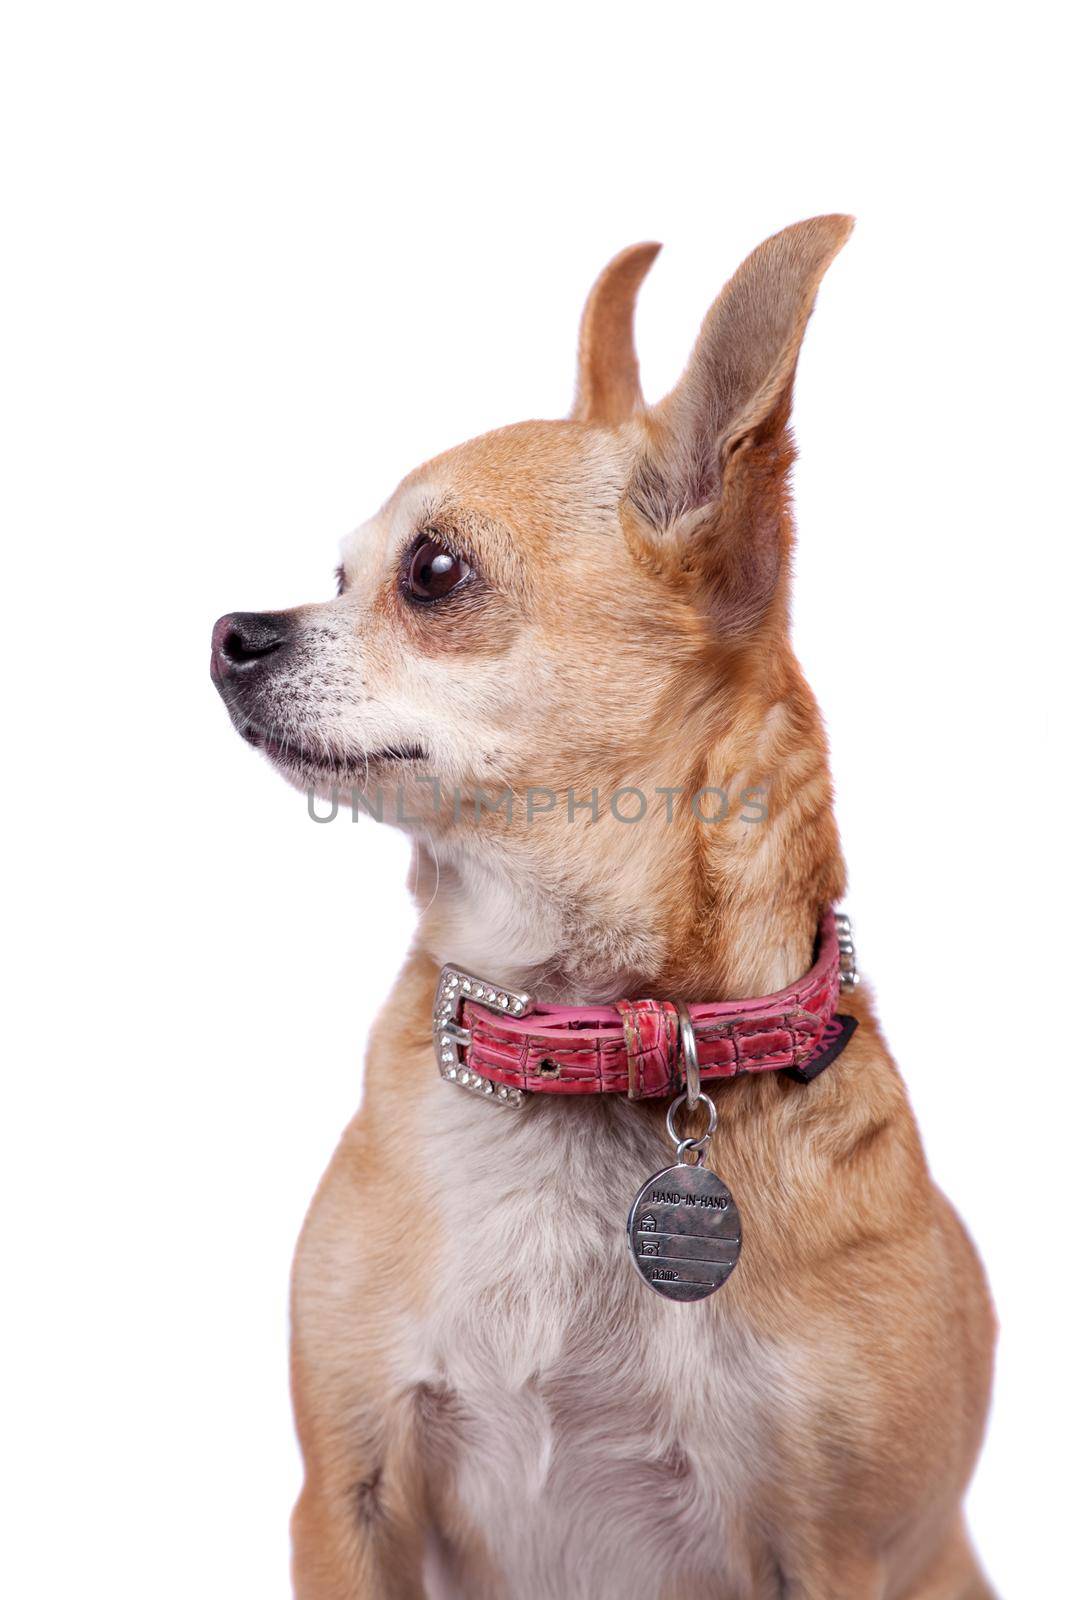 Chihuahua, 9 years old, isolated on the white background